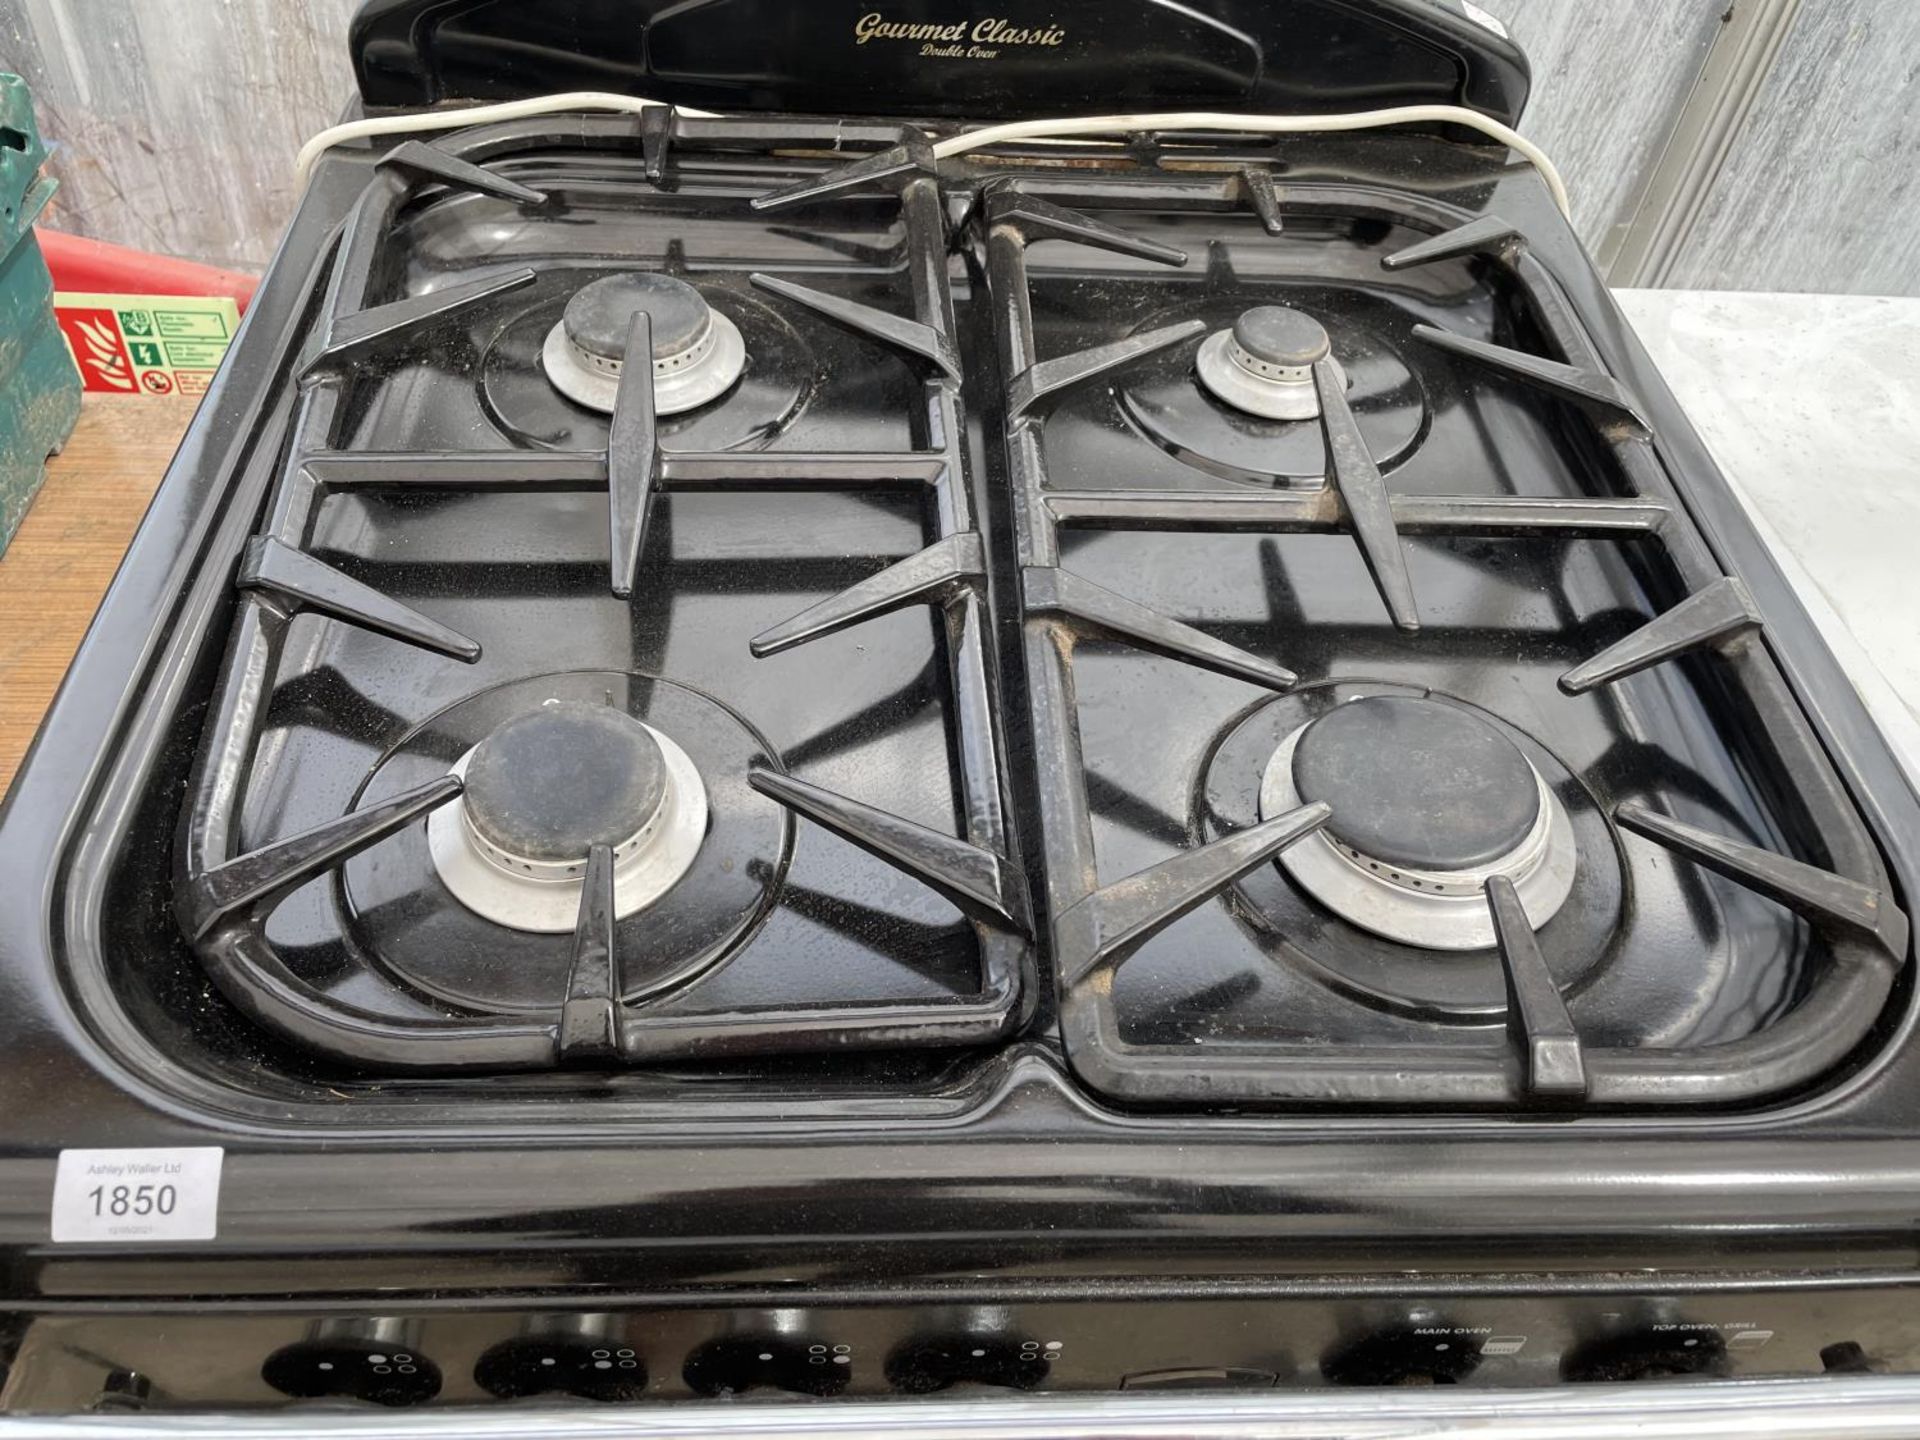 A CREAM AND BLACK LEISURE FREE STANDING COOKER AND HOB BELIEVED WORKING BUT NO WARRANTY - Image 2 of 6